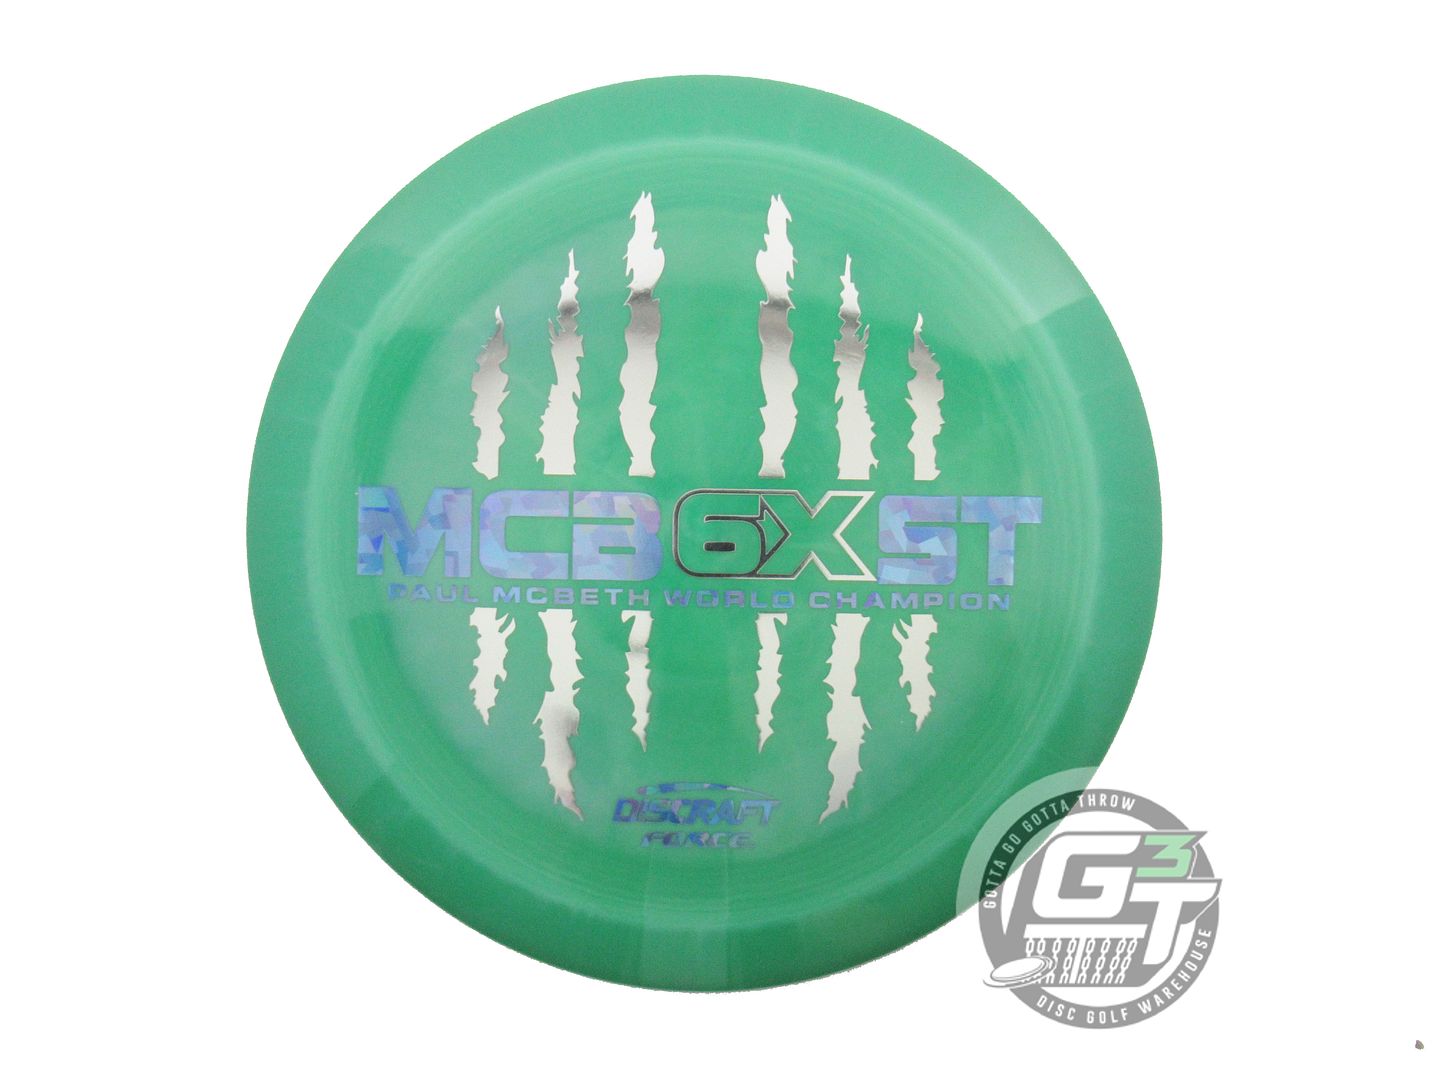 Discraft Limited Edition Paul McBeth 6X Commemorative McBeast Stamp ESP Force Distance Driver Golf Disc (Individually Listed)